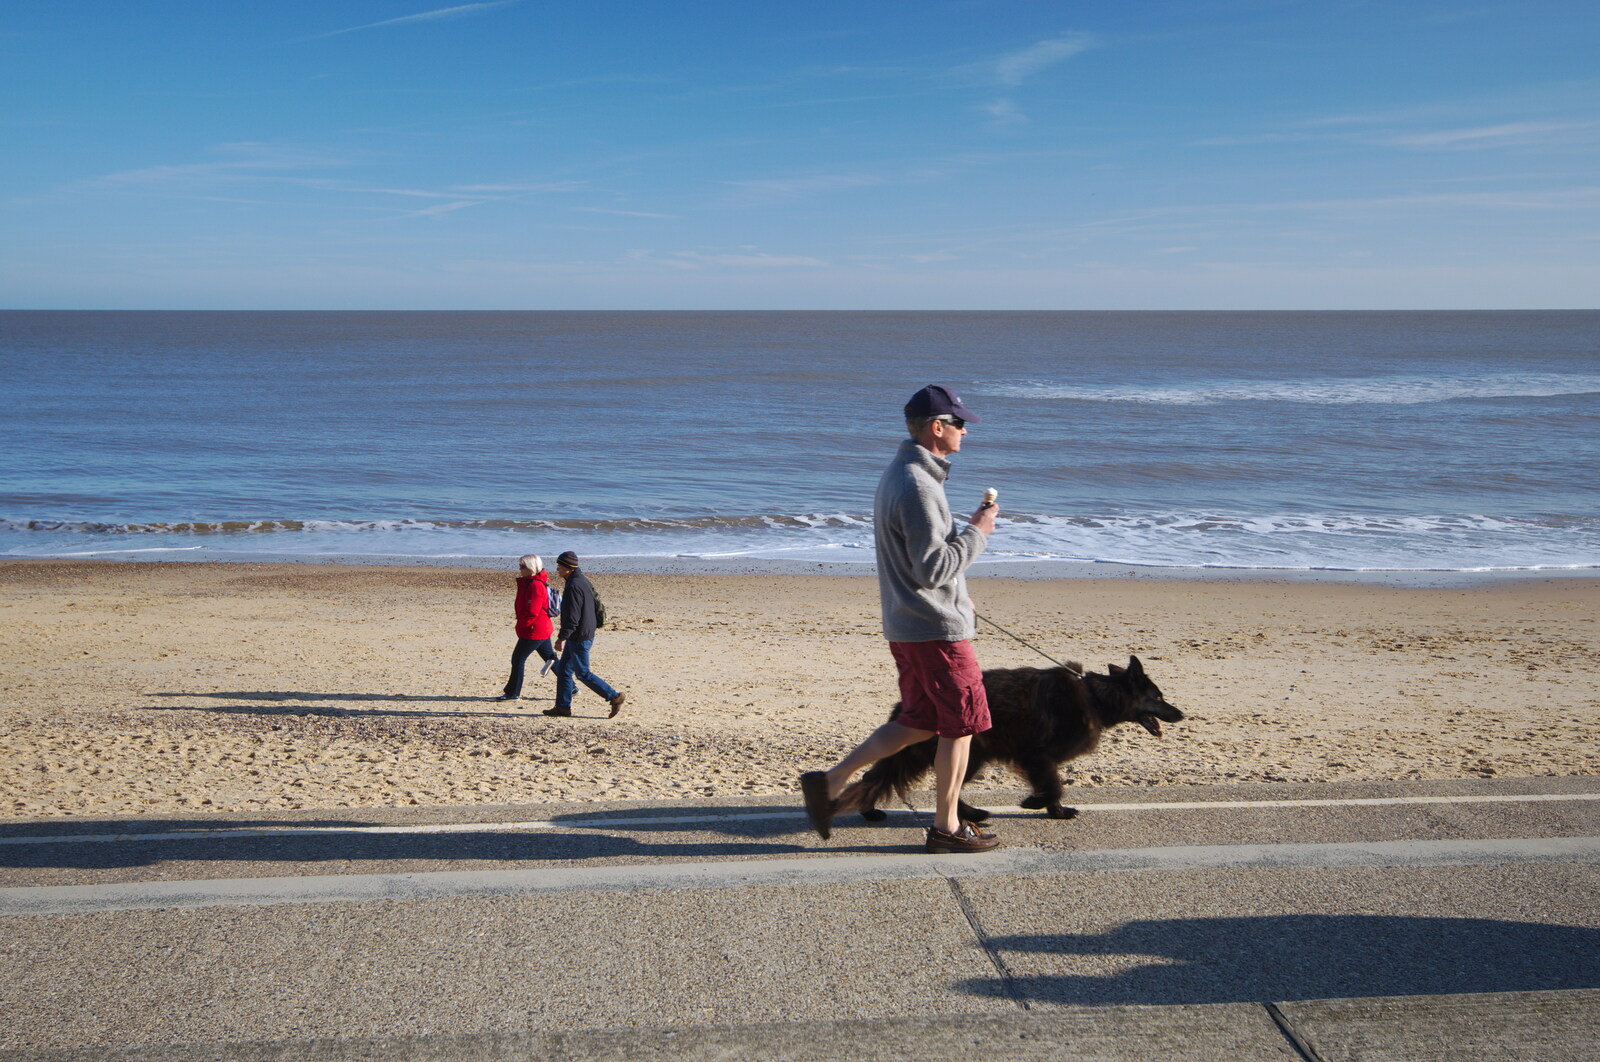 Walking the dog from A Trip up a Lighthouse, Southwold, Suffolk - 27th October 2019